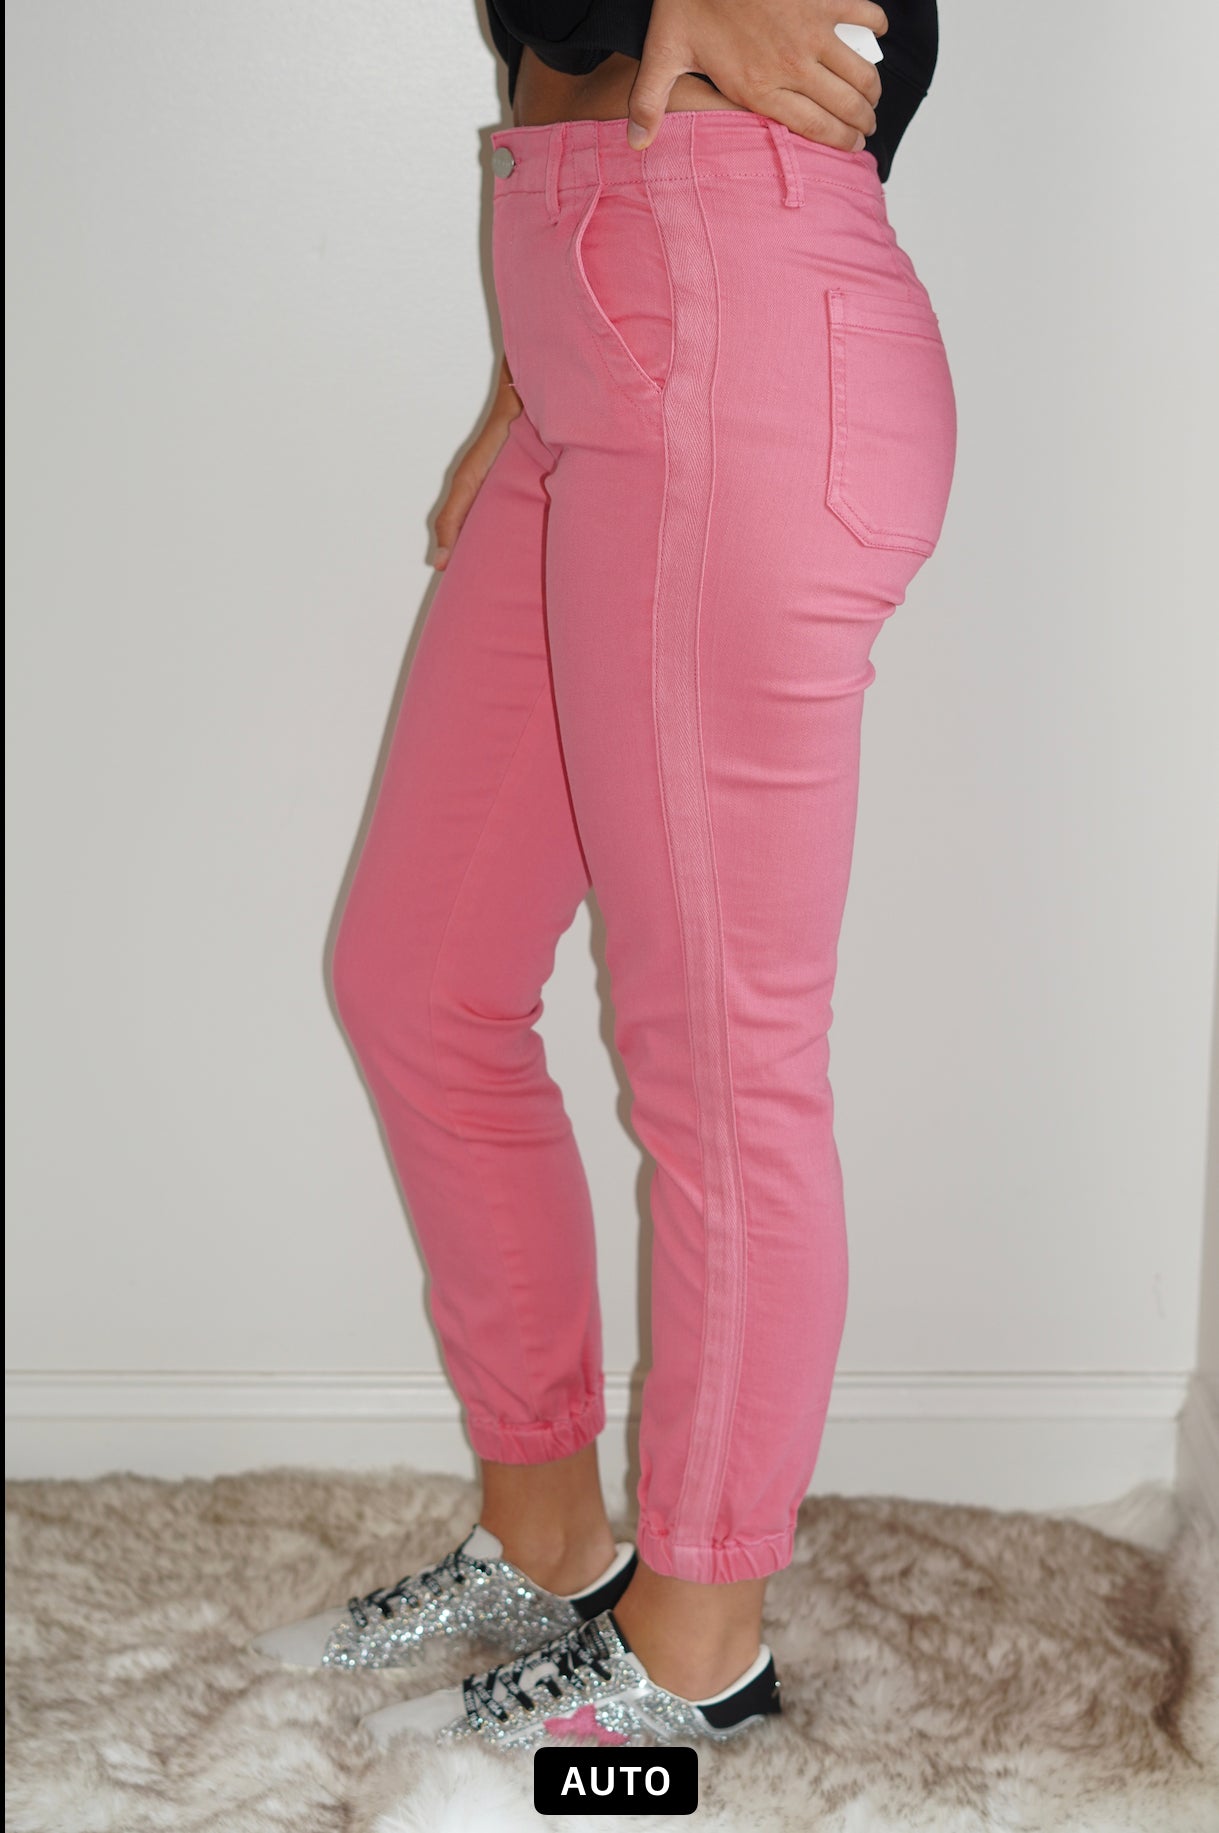 Belle High Rise Pink Jogger Jeans Cuffed Ankle  Pink Line Detail Down the side Button and Zipper Closure  Front and Back Pockets 92% Cotton 6% Polyester  2% Spandex Turn inside out, Machine wash cold, tumble dry low, gentle cycle with colors, Do not bleach, hang to dry, Indigo will bleed, iron if needed  Model Wearing Size 1